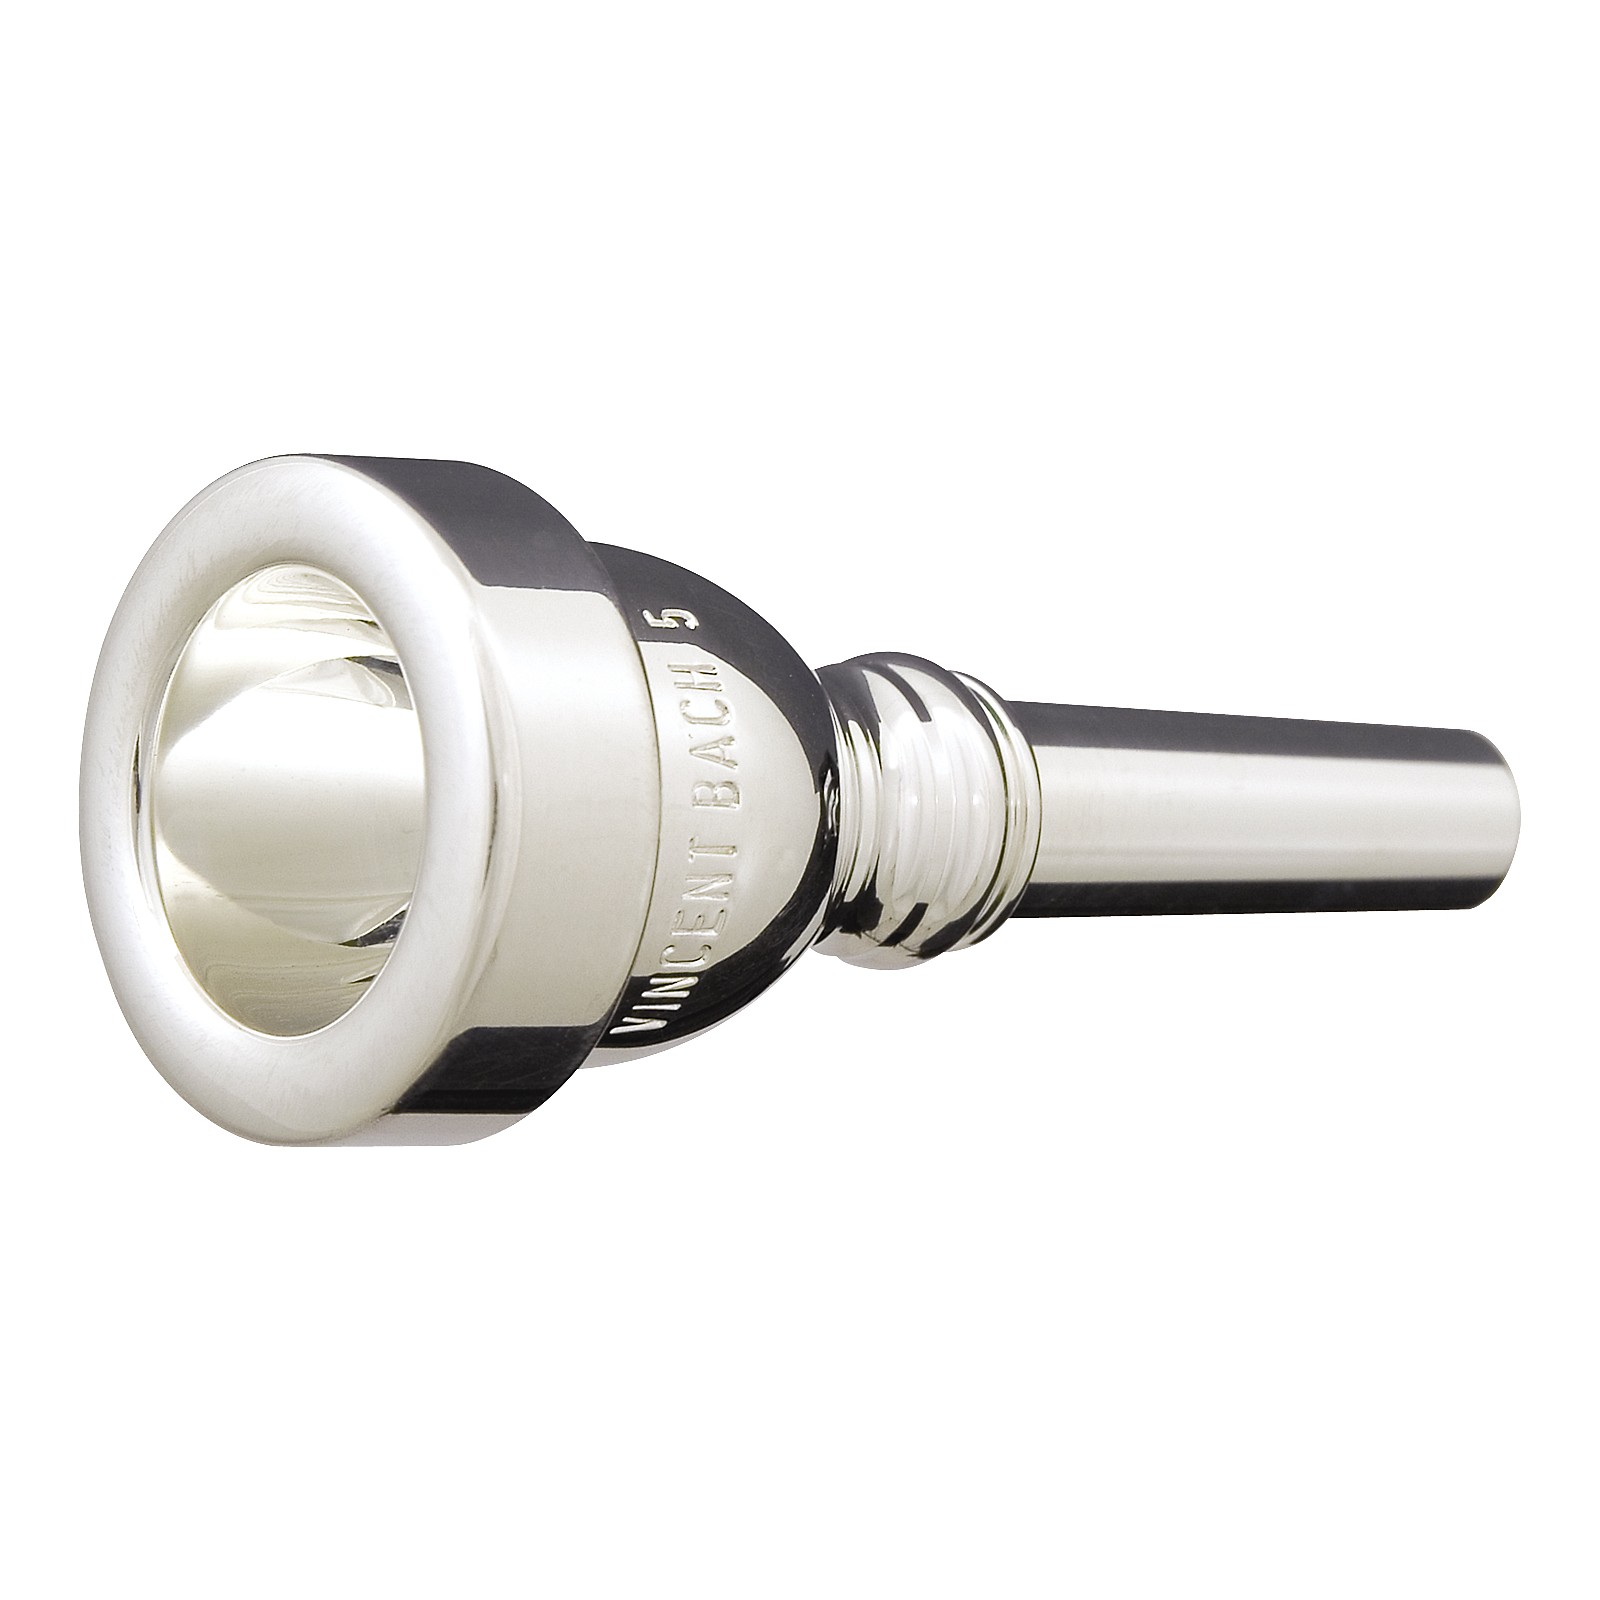 Bach Bach Mellophone Mouthpiece in Silver